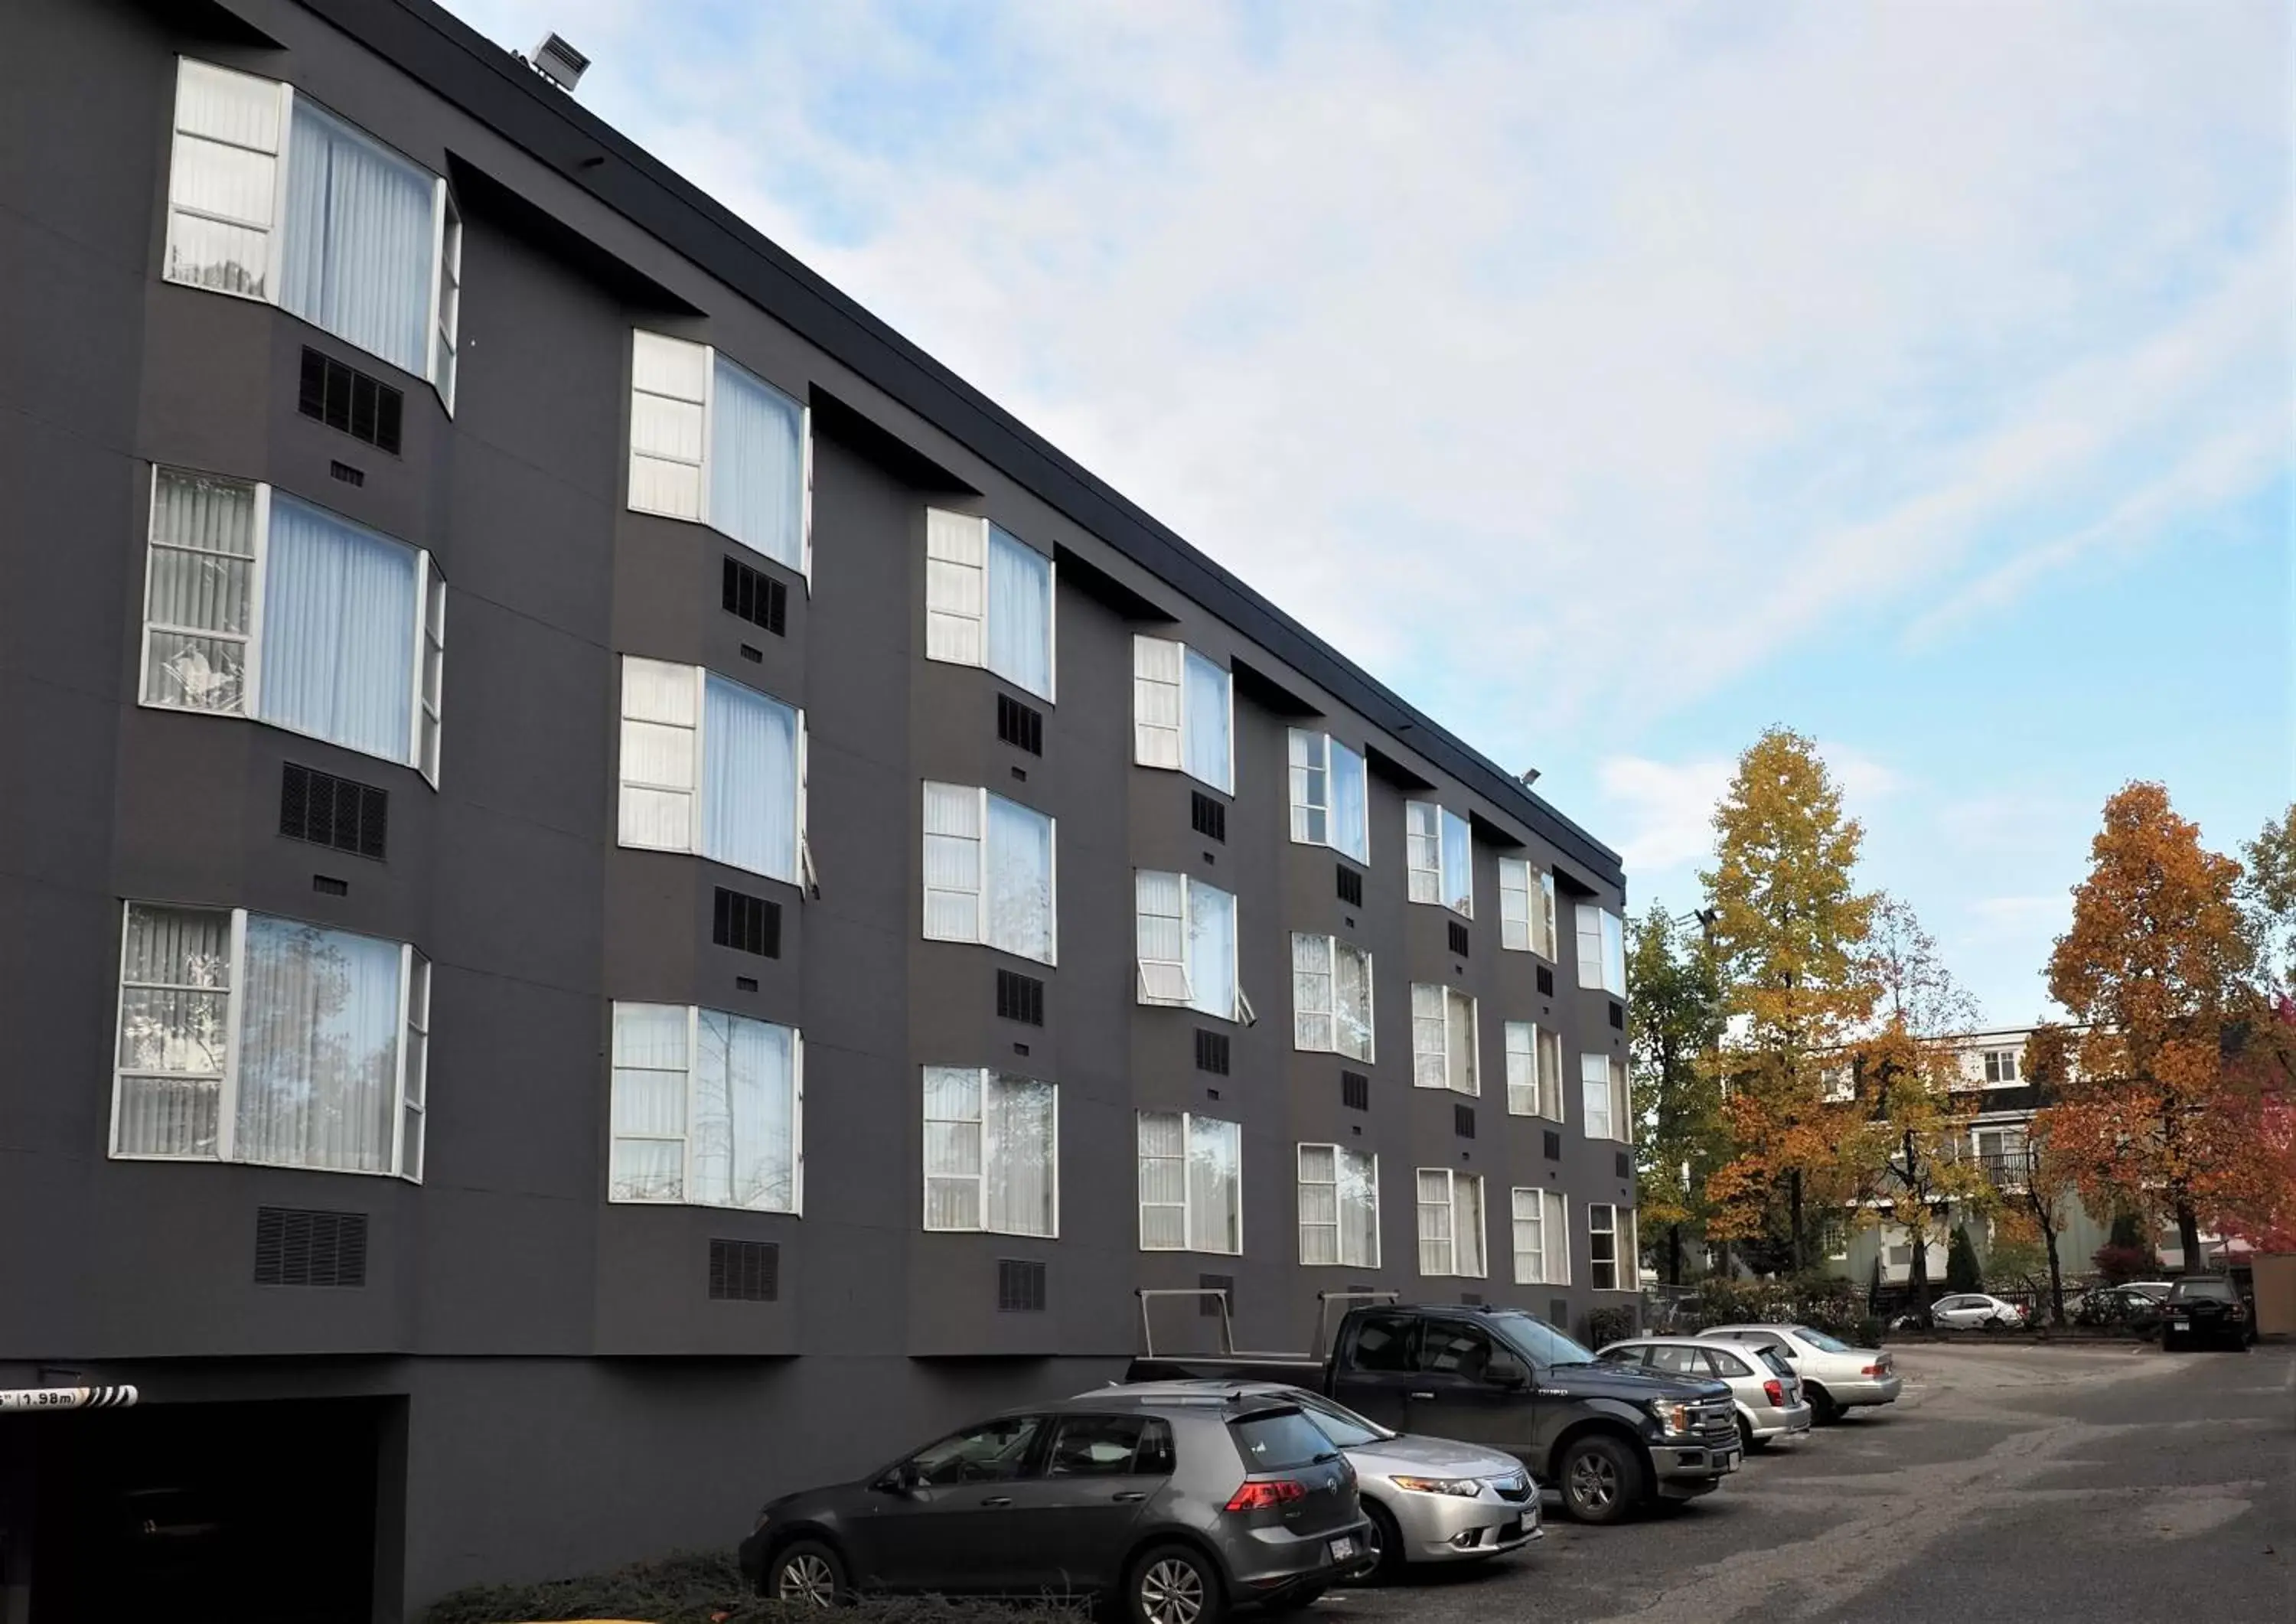 Property Building in Best Western Plus Vancouver Airport Hotel